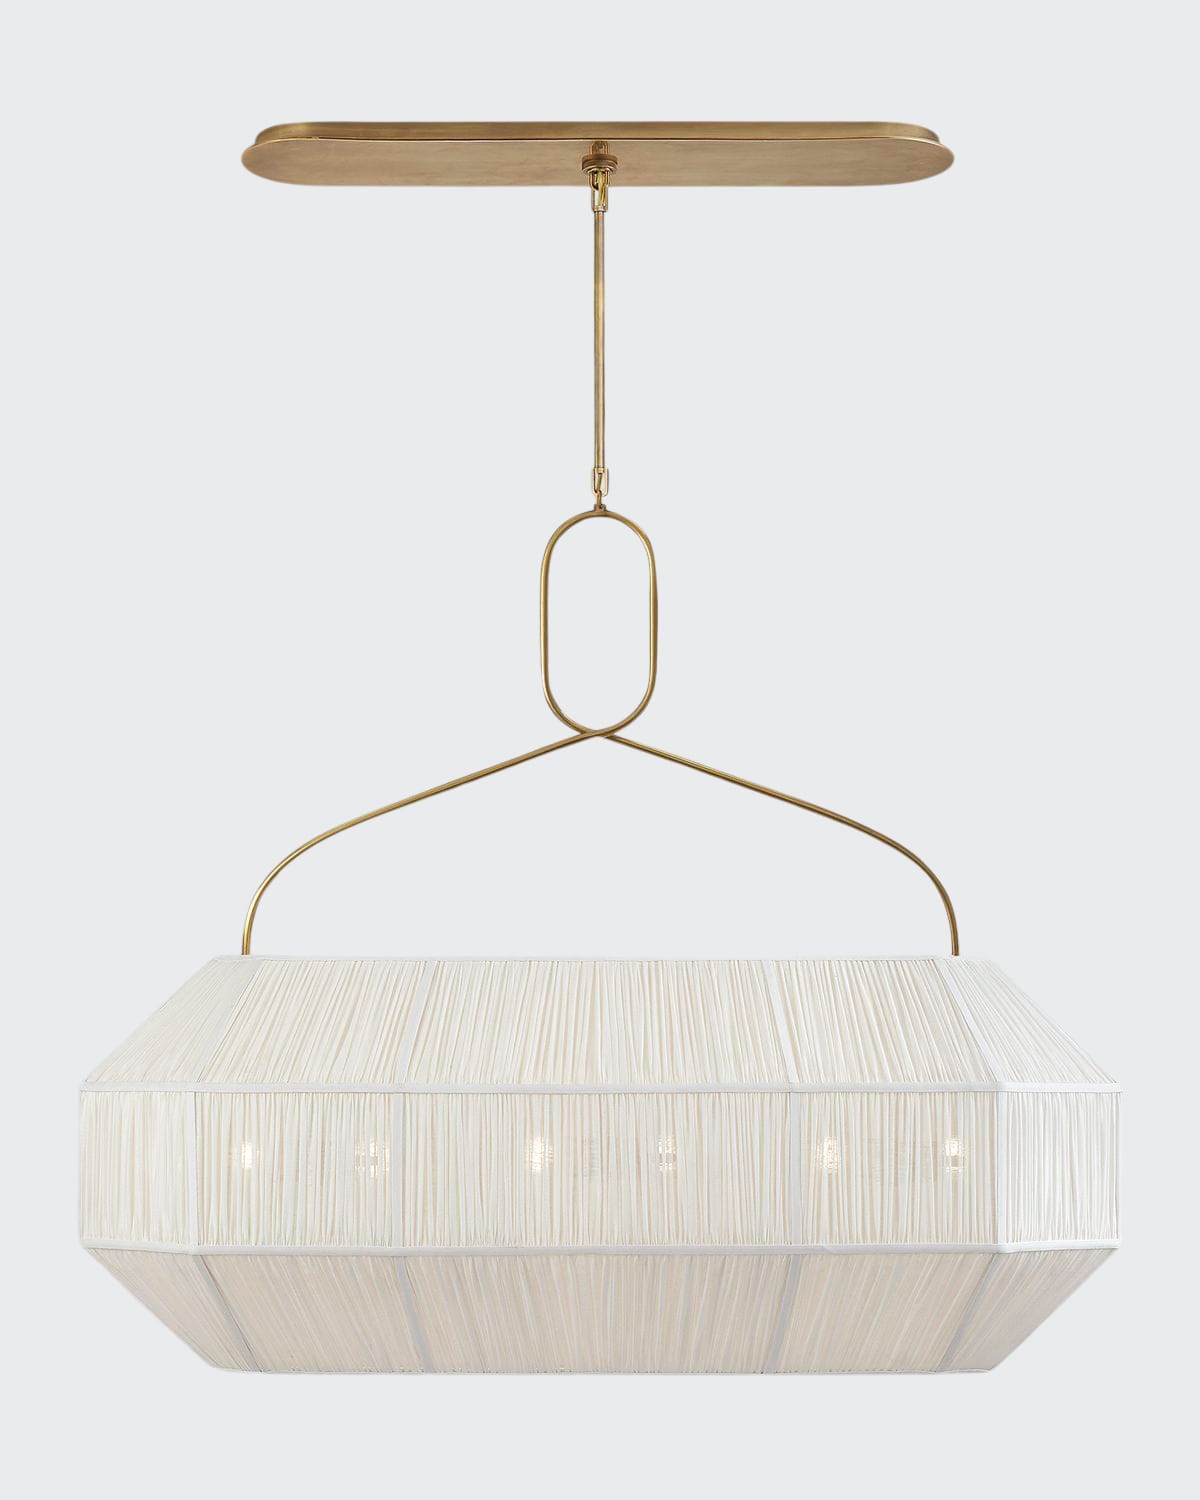 Kelly Wearstler For Visual Comfort Signature Forza Medium Gathered Linear Lantern In Antique Brass